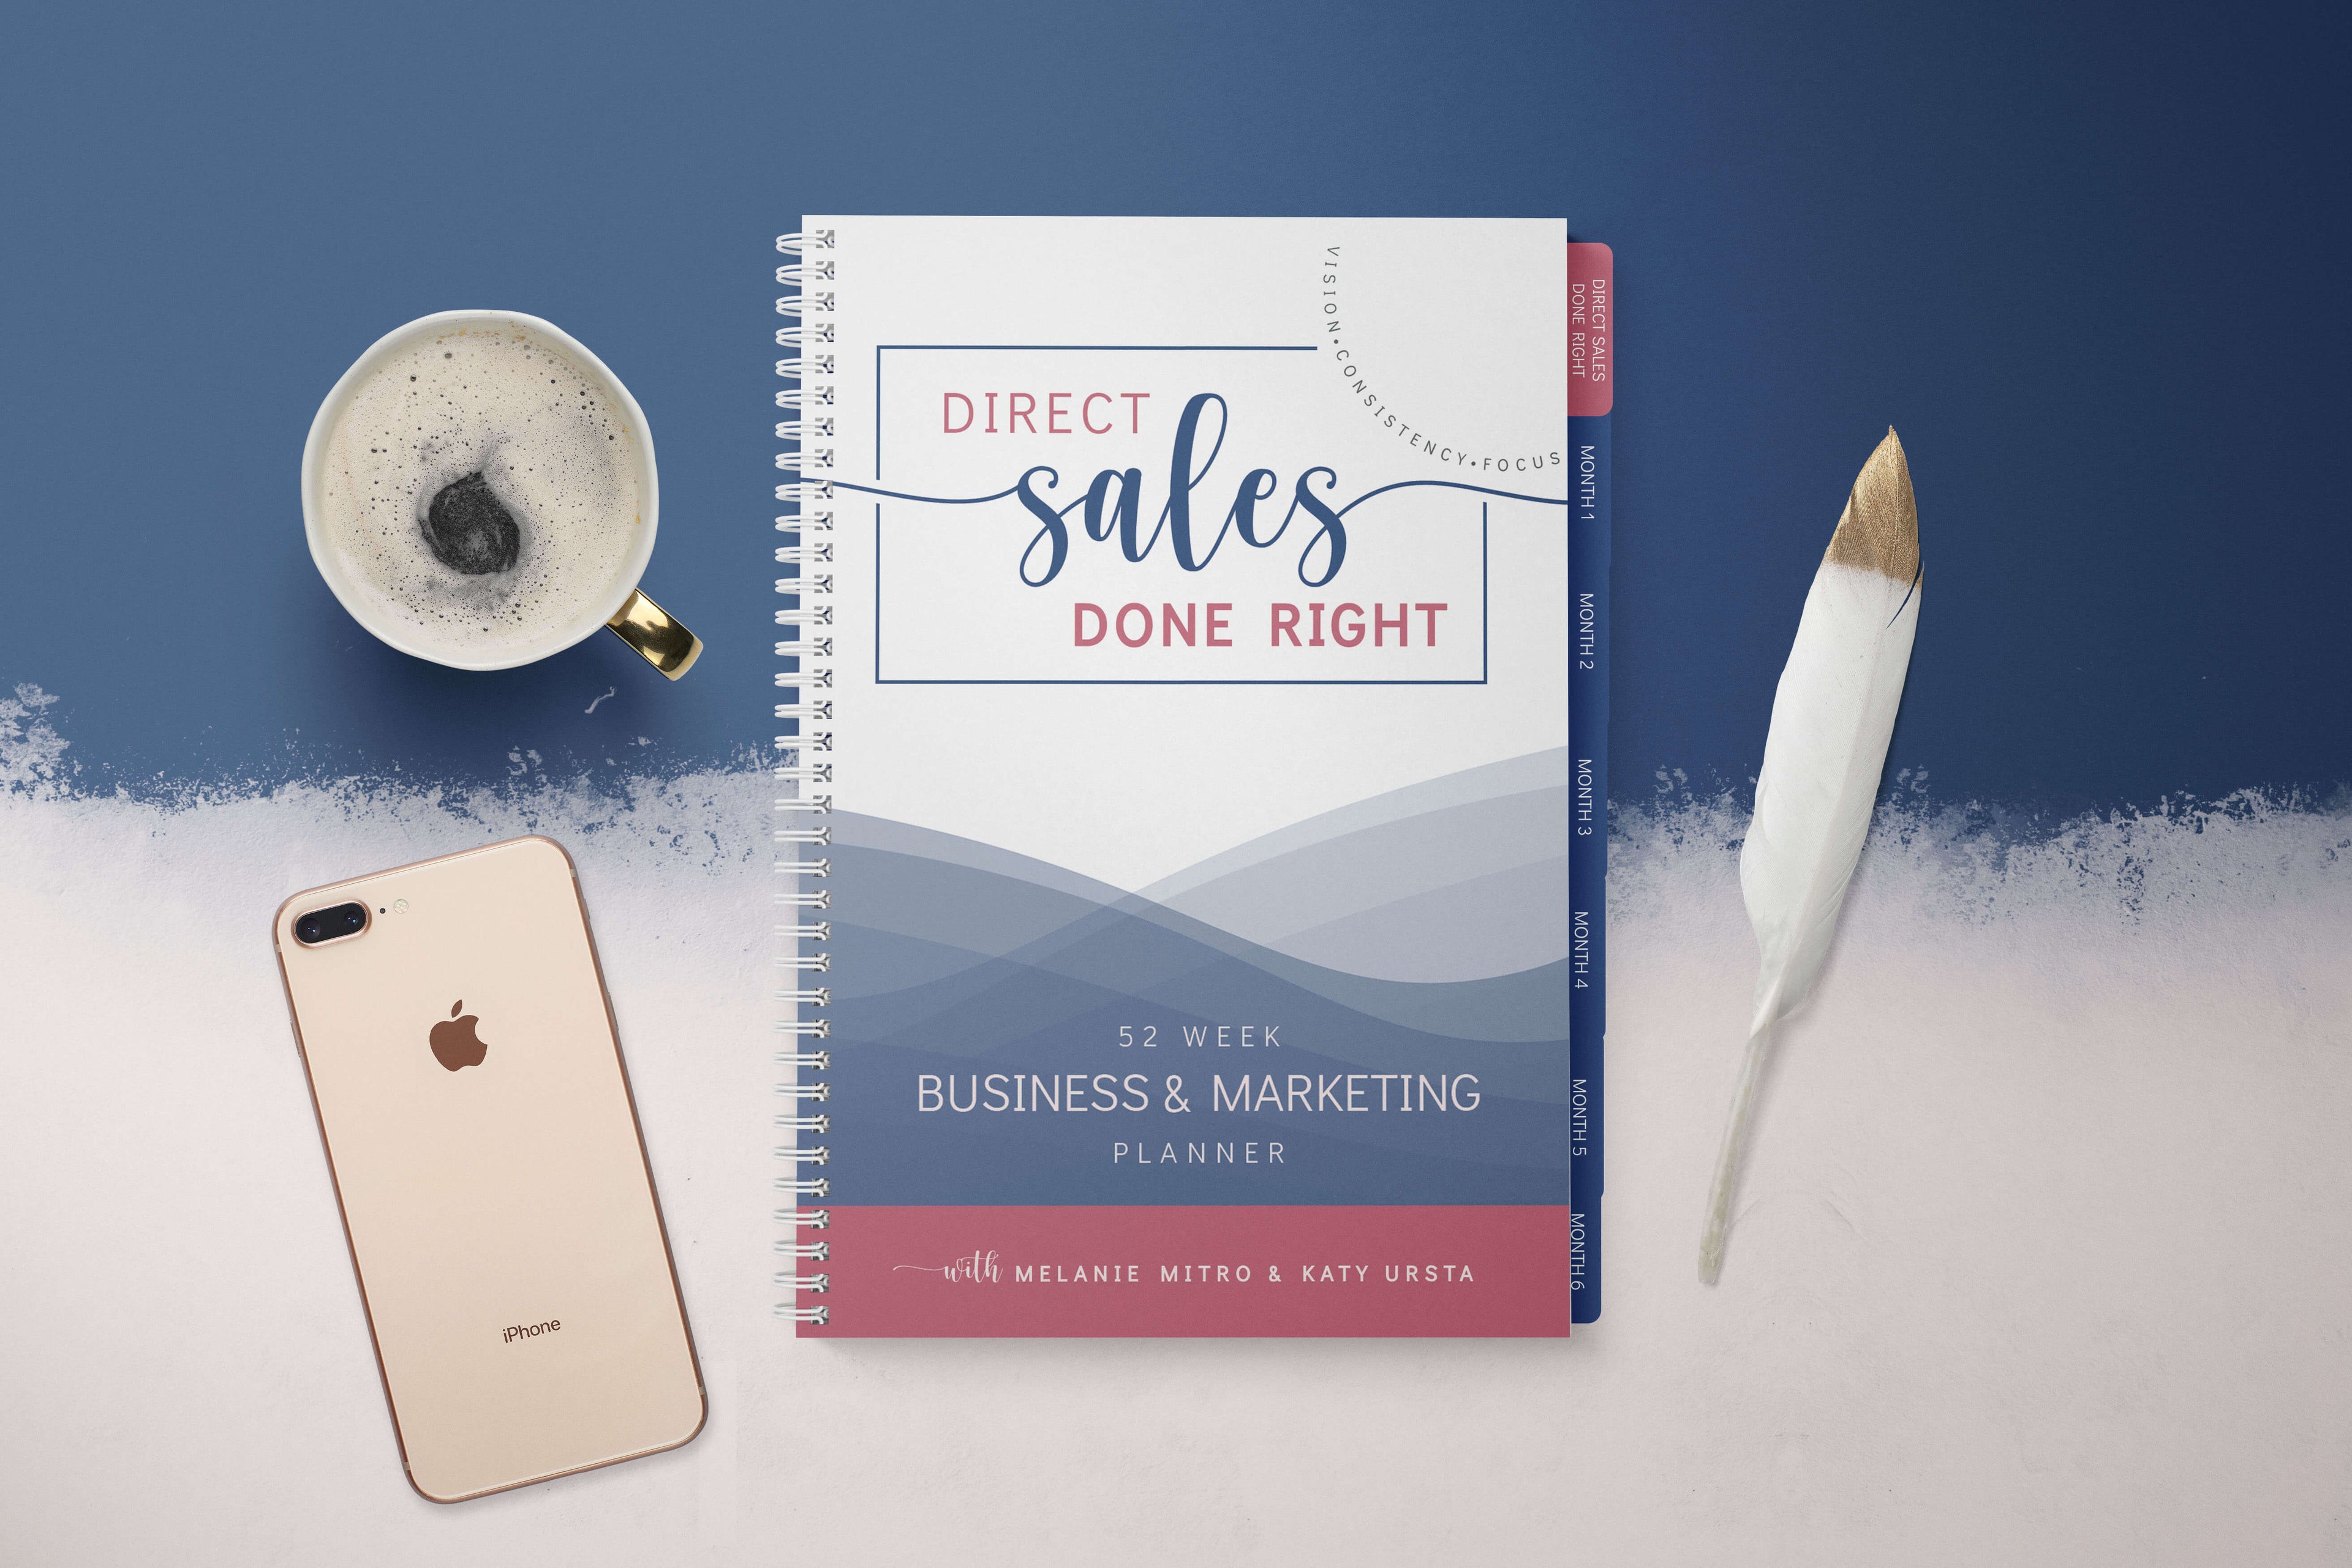 Load video: The Direct Sales Done Right: 52 Week Business and Marketing Planner